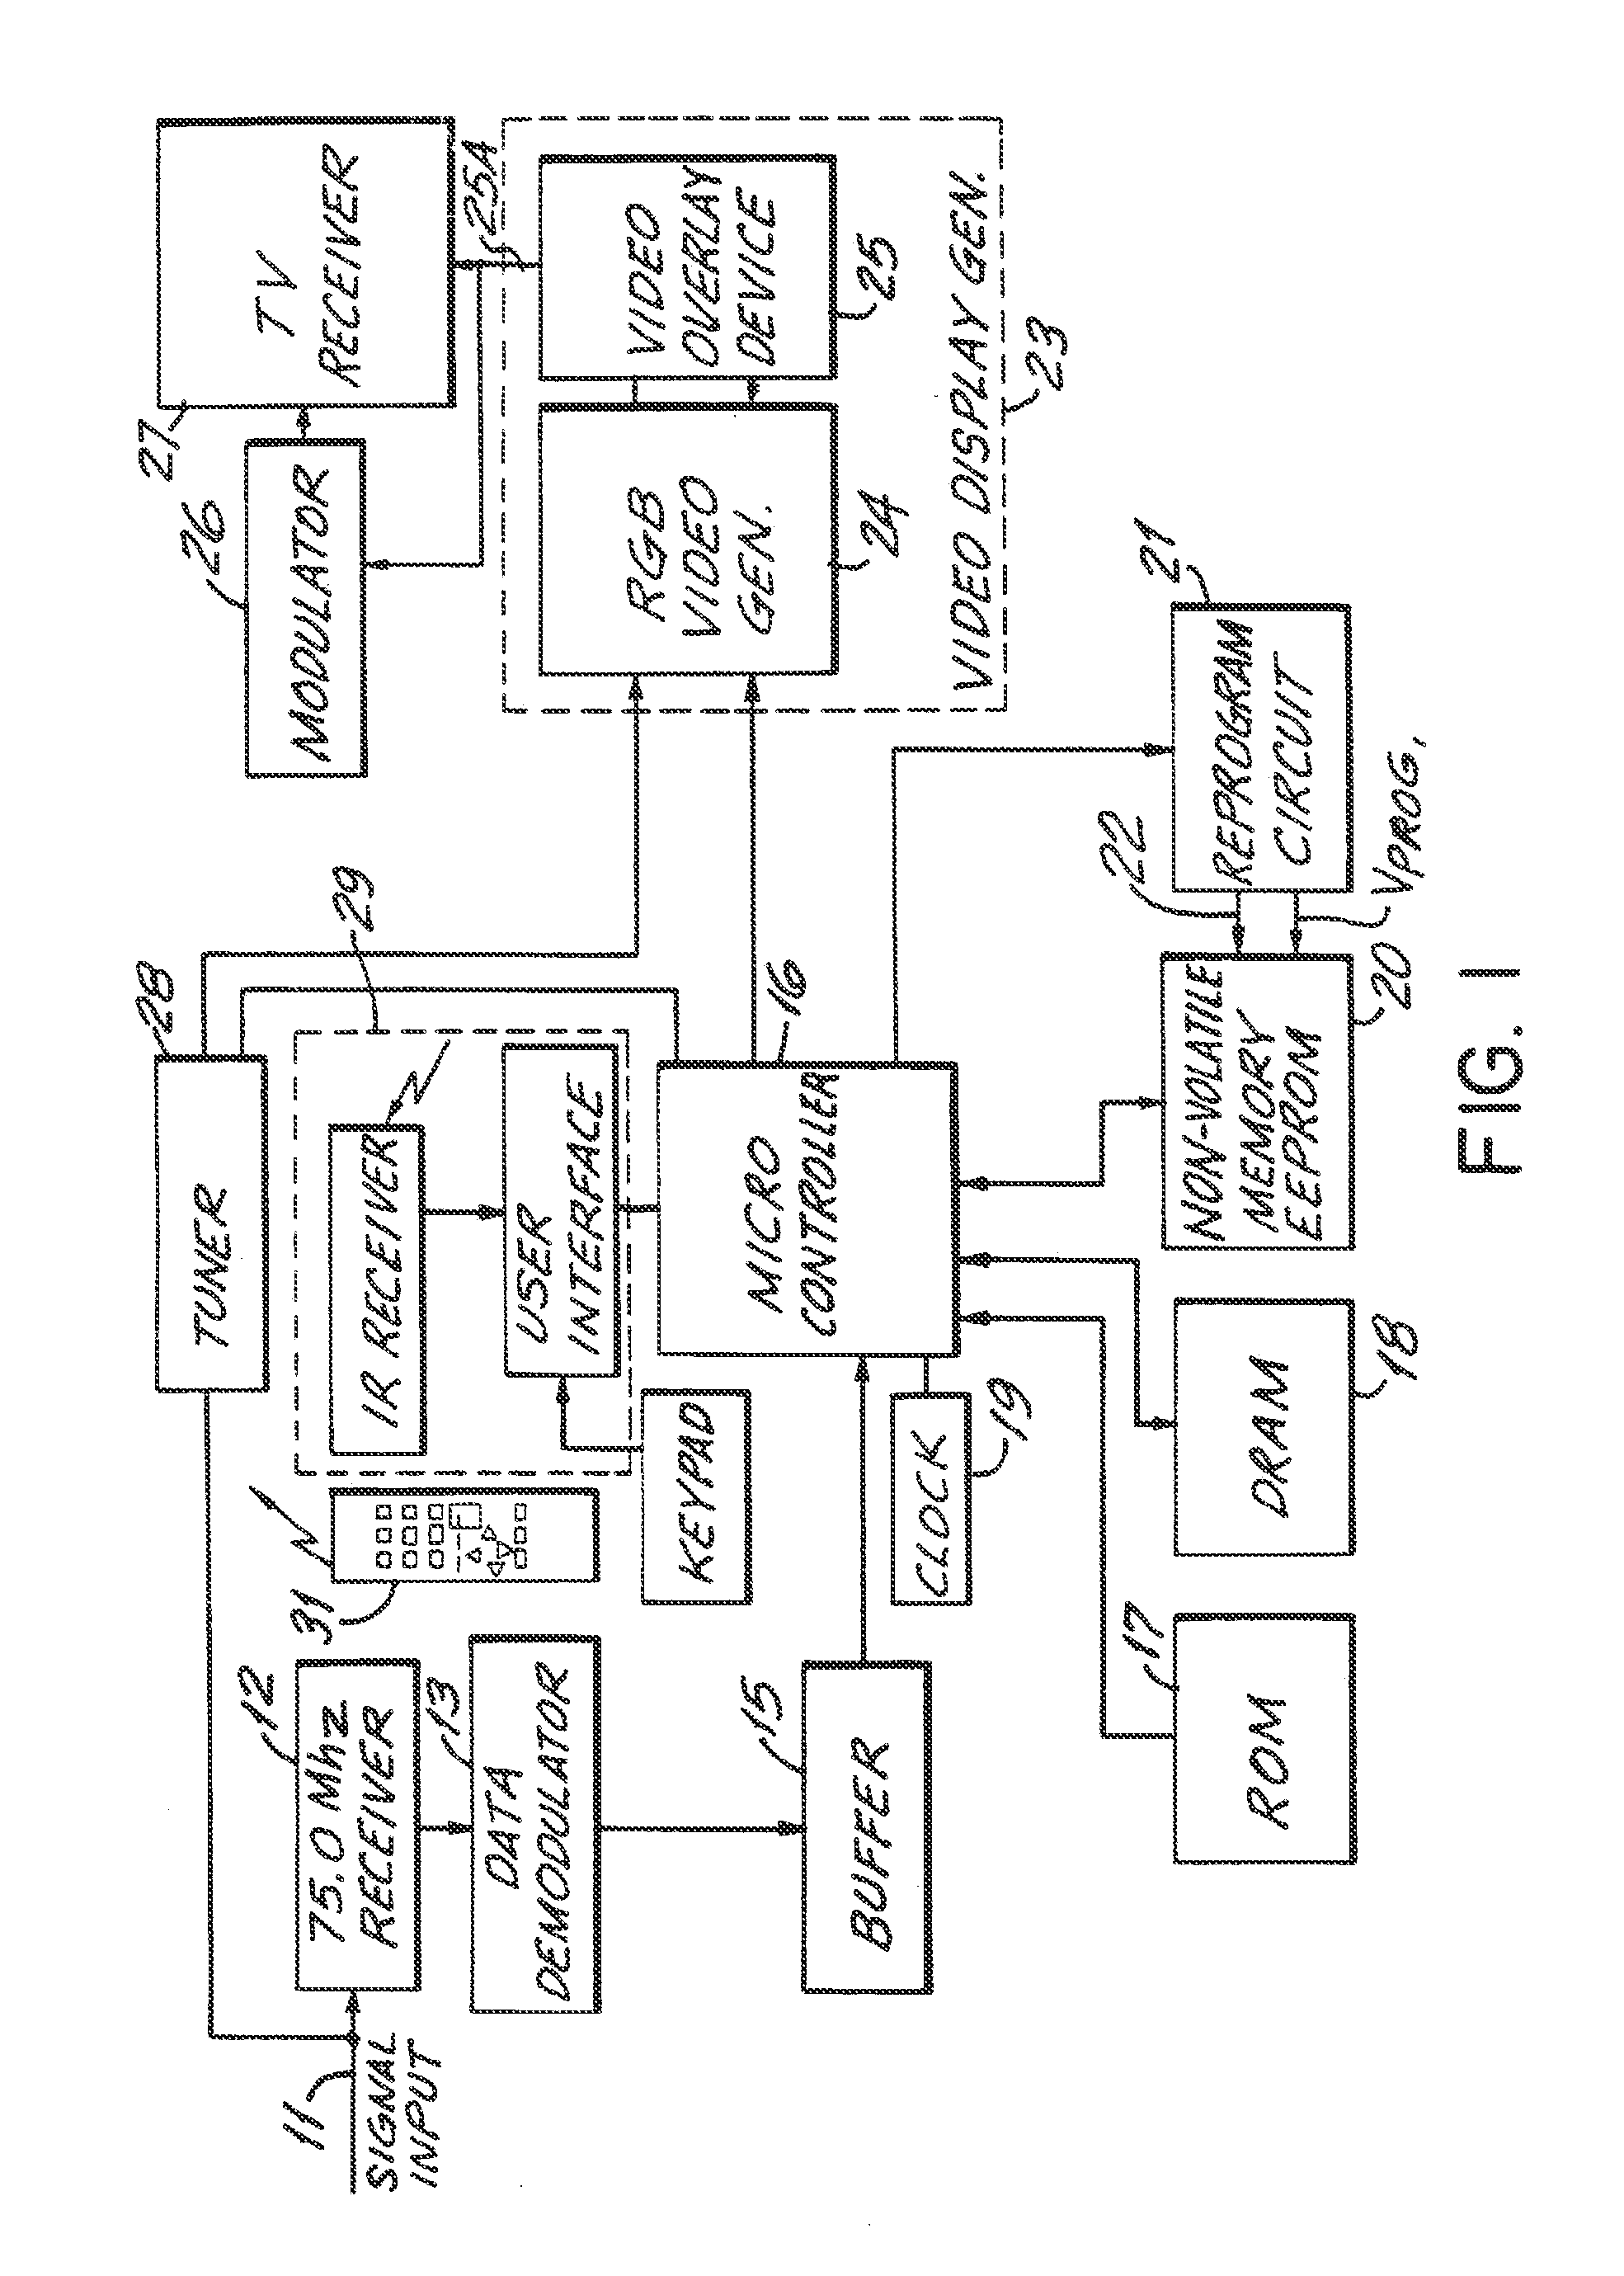 Improved electronic television program guide schedule system and method